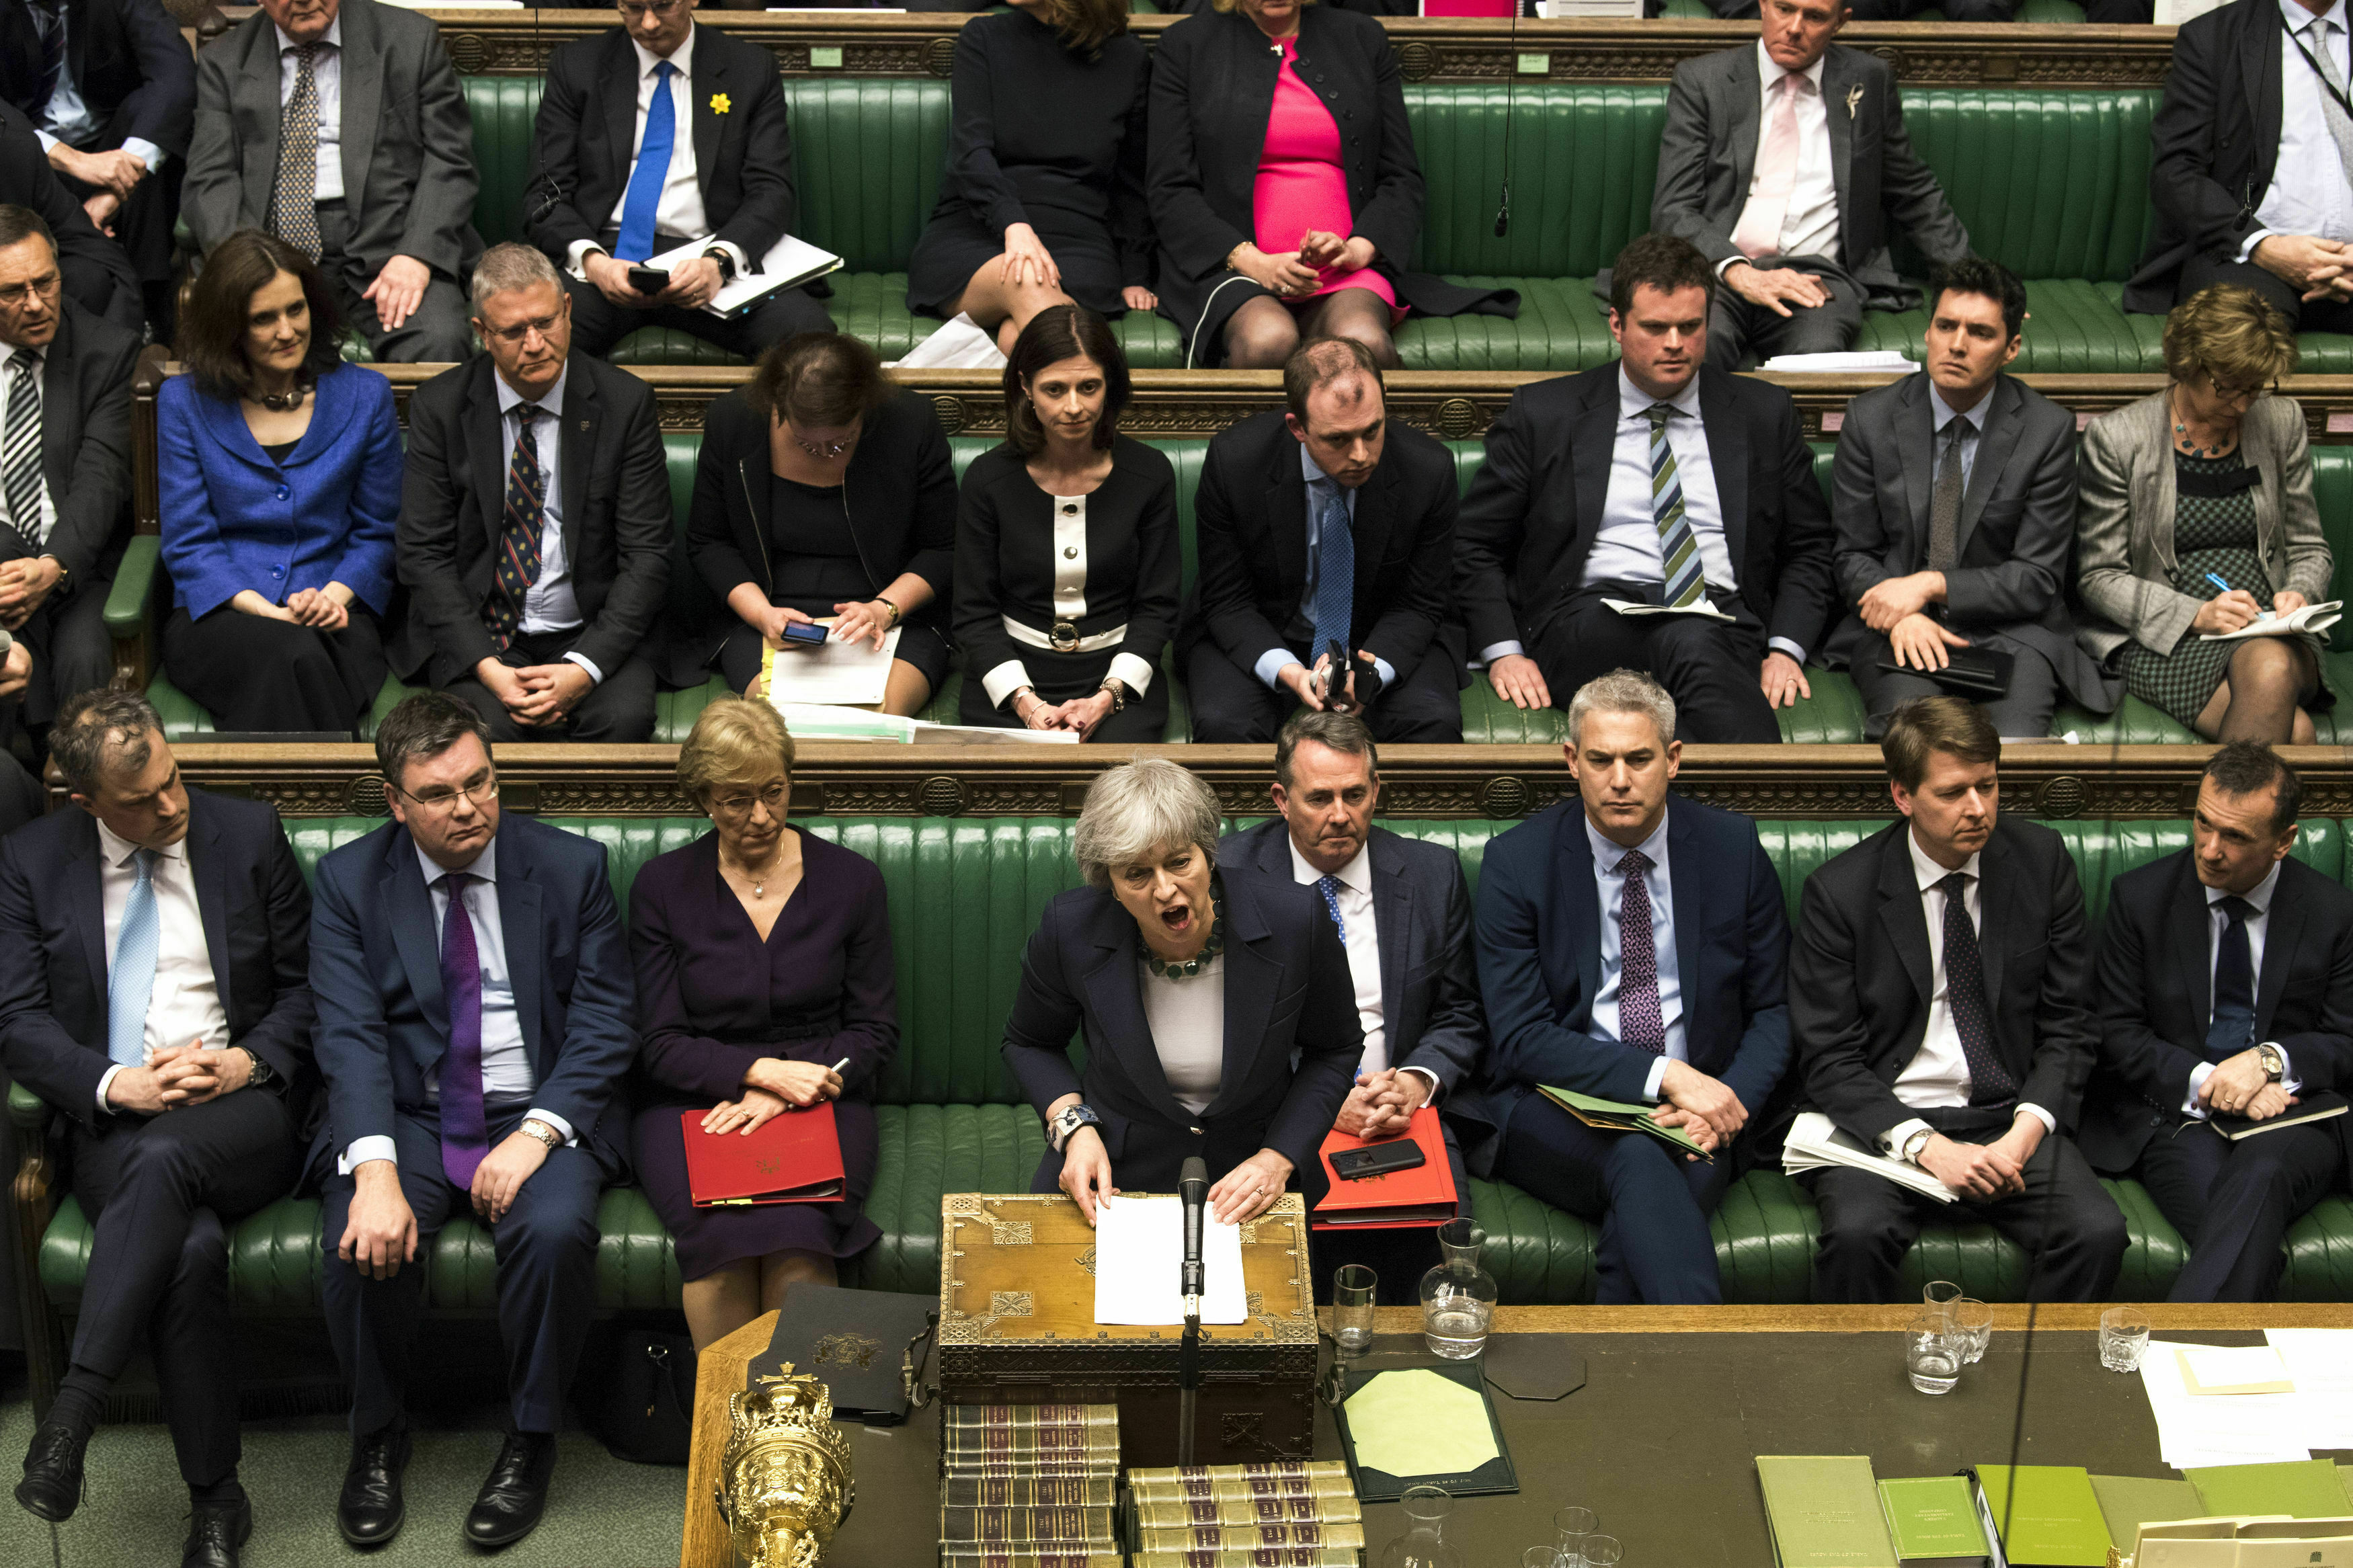 Britain's Prime Minister Theresa May speaks to lawmakers in the House of Commons, London, Wednesday March 13, 2019. In a tentative first step toward ending months of political deadlock, British lawmakers voted Wednesday to block the country from leaving the European Union without a divorce agreement, triggering an attempt to delay that departure, currently due to take place on March 29. (Mark Duffy/UK Parliament via AP)